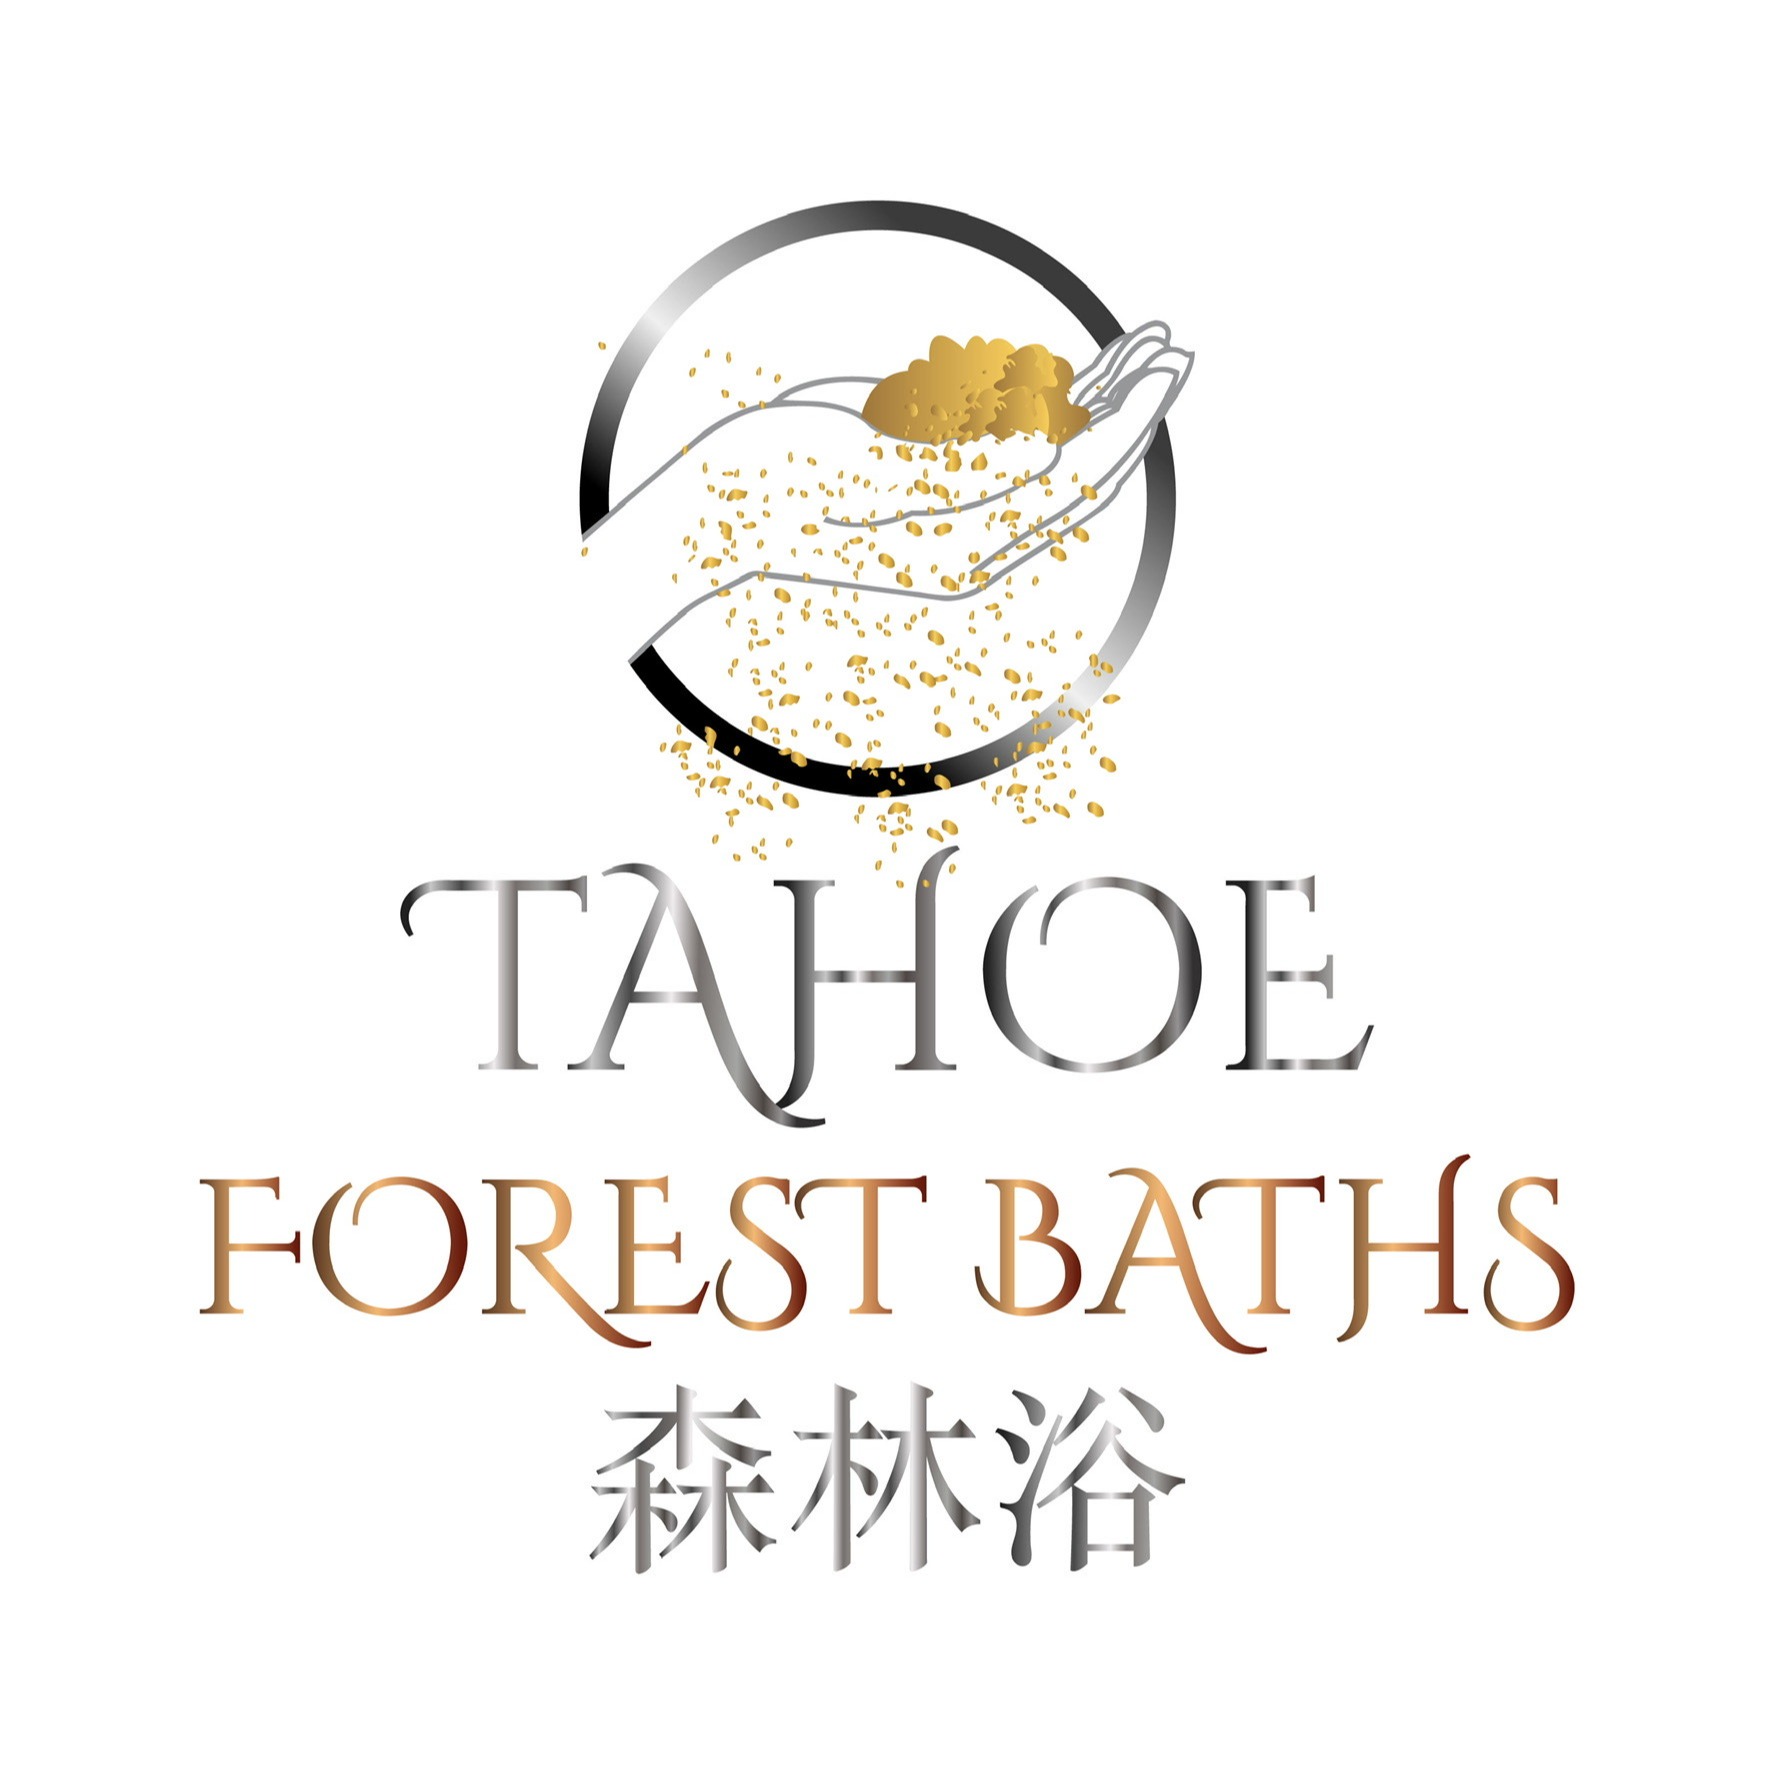 Tahoe Forest Baths - Stateline, NV 89449 - (530)208-8997 | ShowMeLocal.com